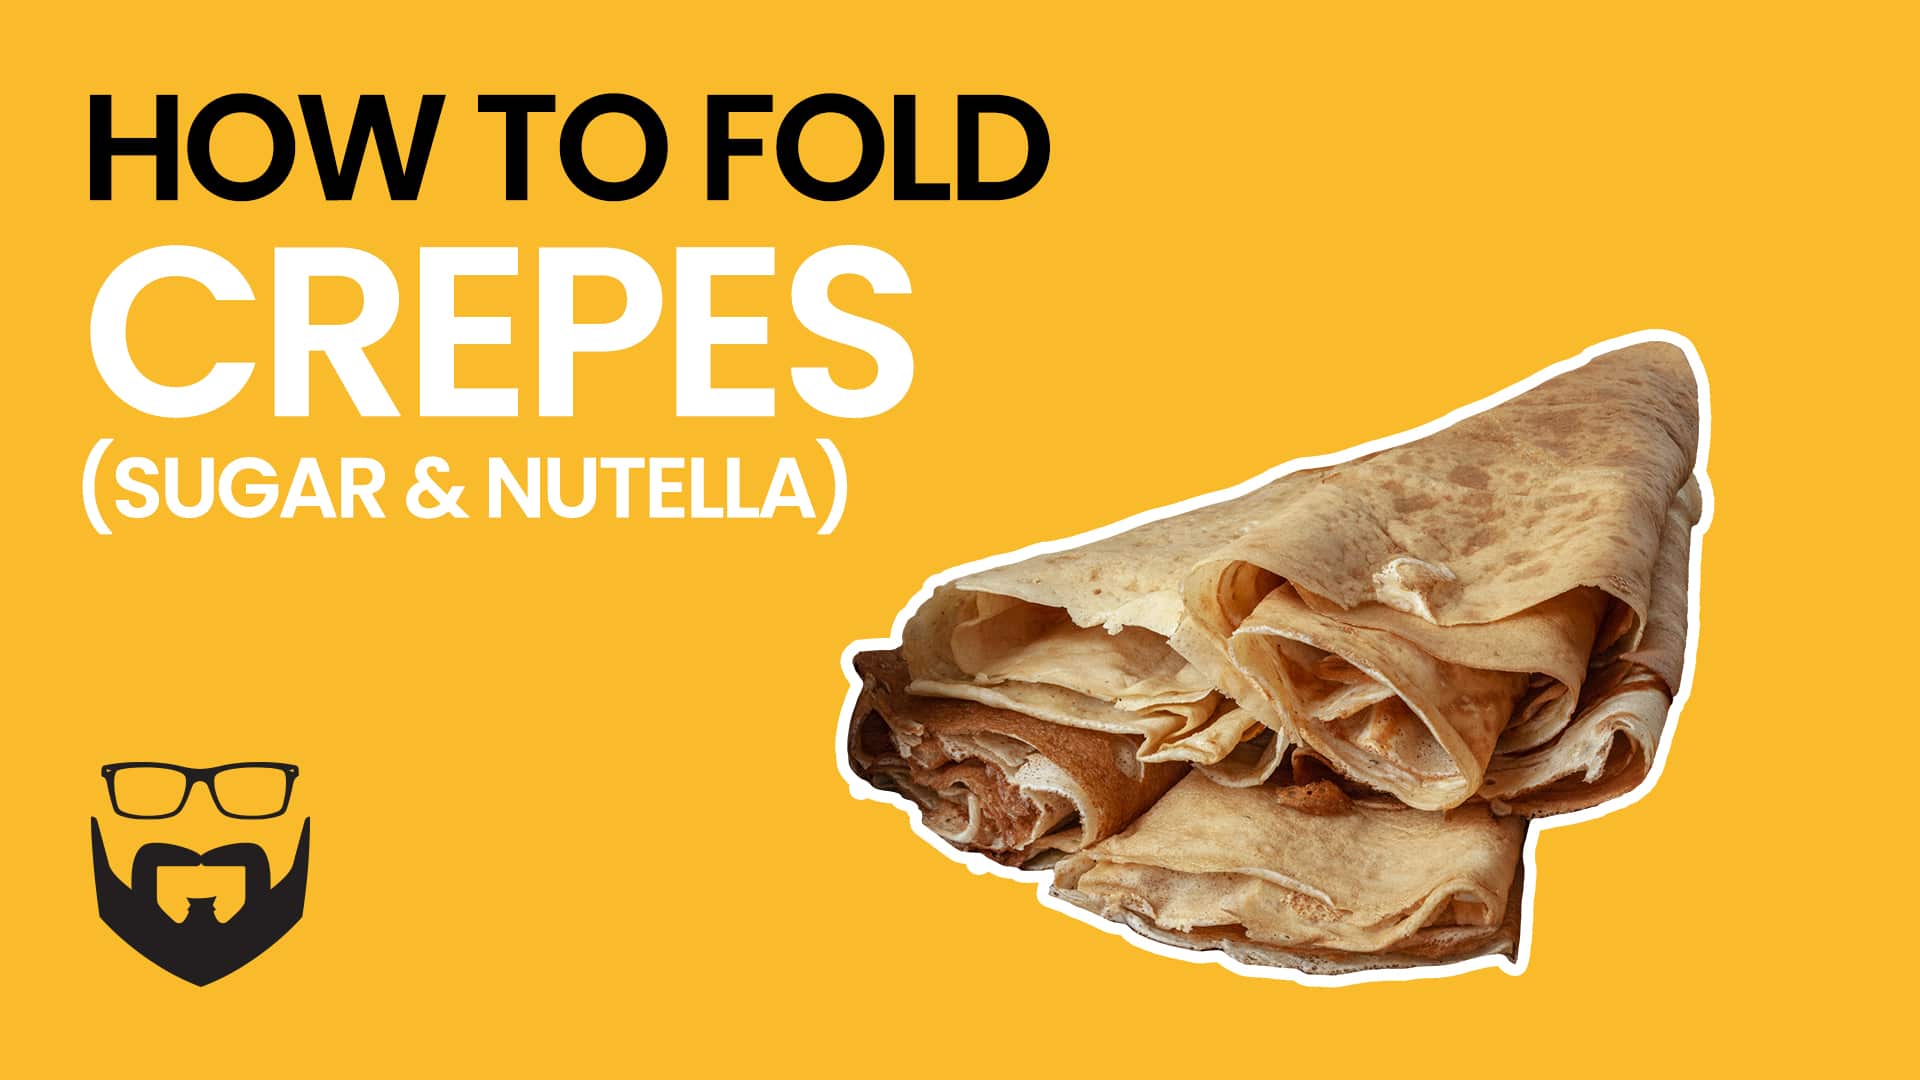 How to Fold Crepes (Sugar & Nutella) Video - Yellow